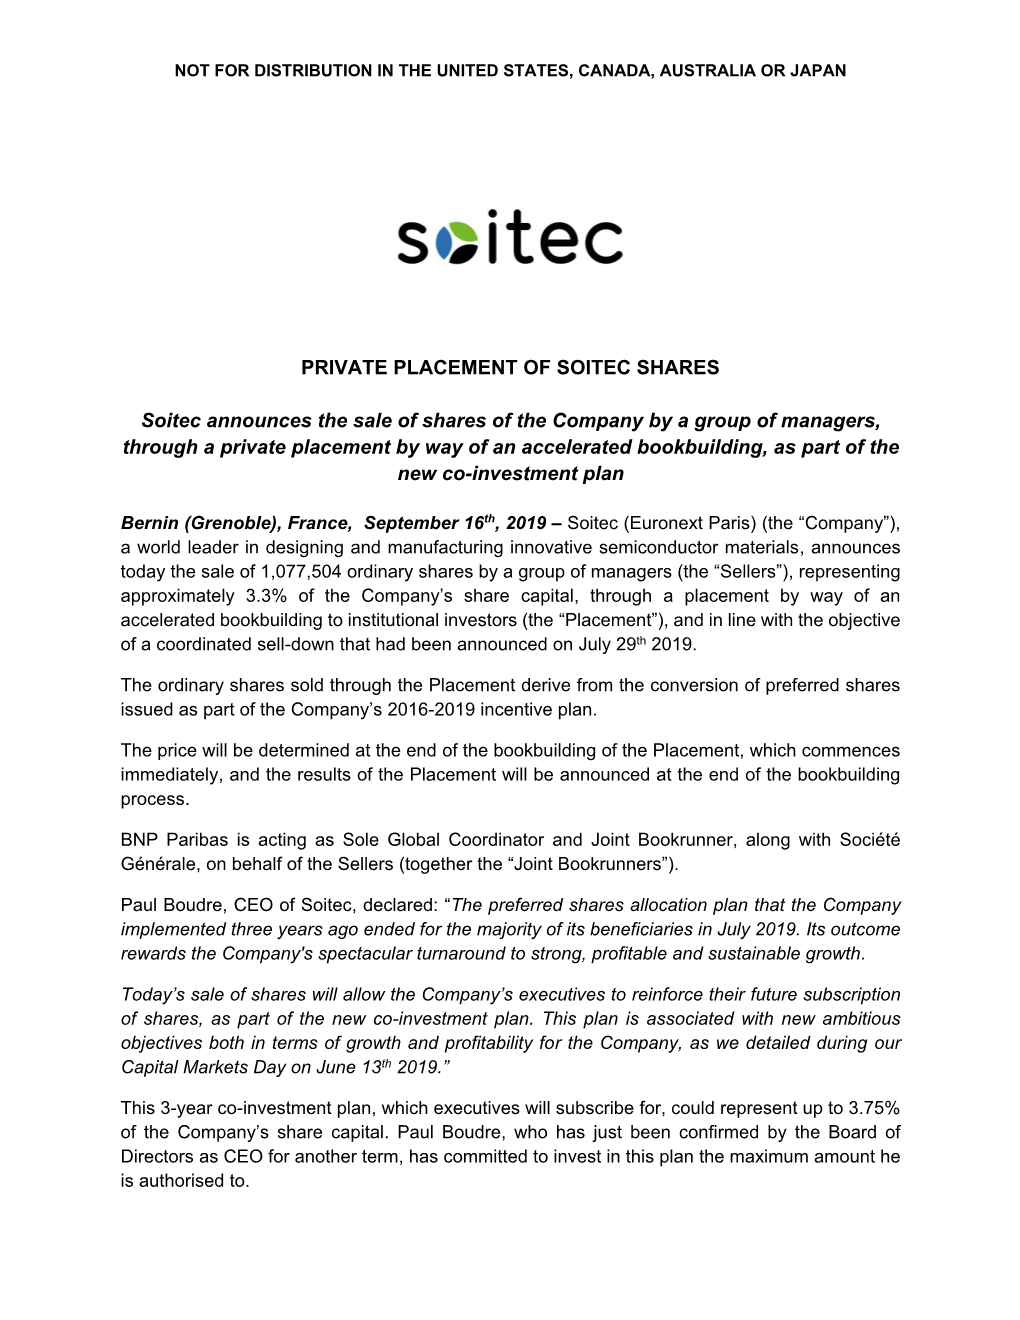 PRIVATE PLACEMENT of SOITEC SHARES Soitec Announces the Sale of Shares of the Company by a Group of Managers, Through a Private